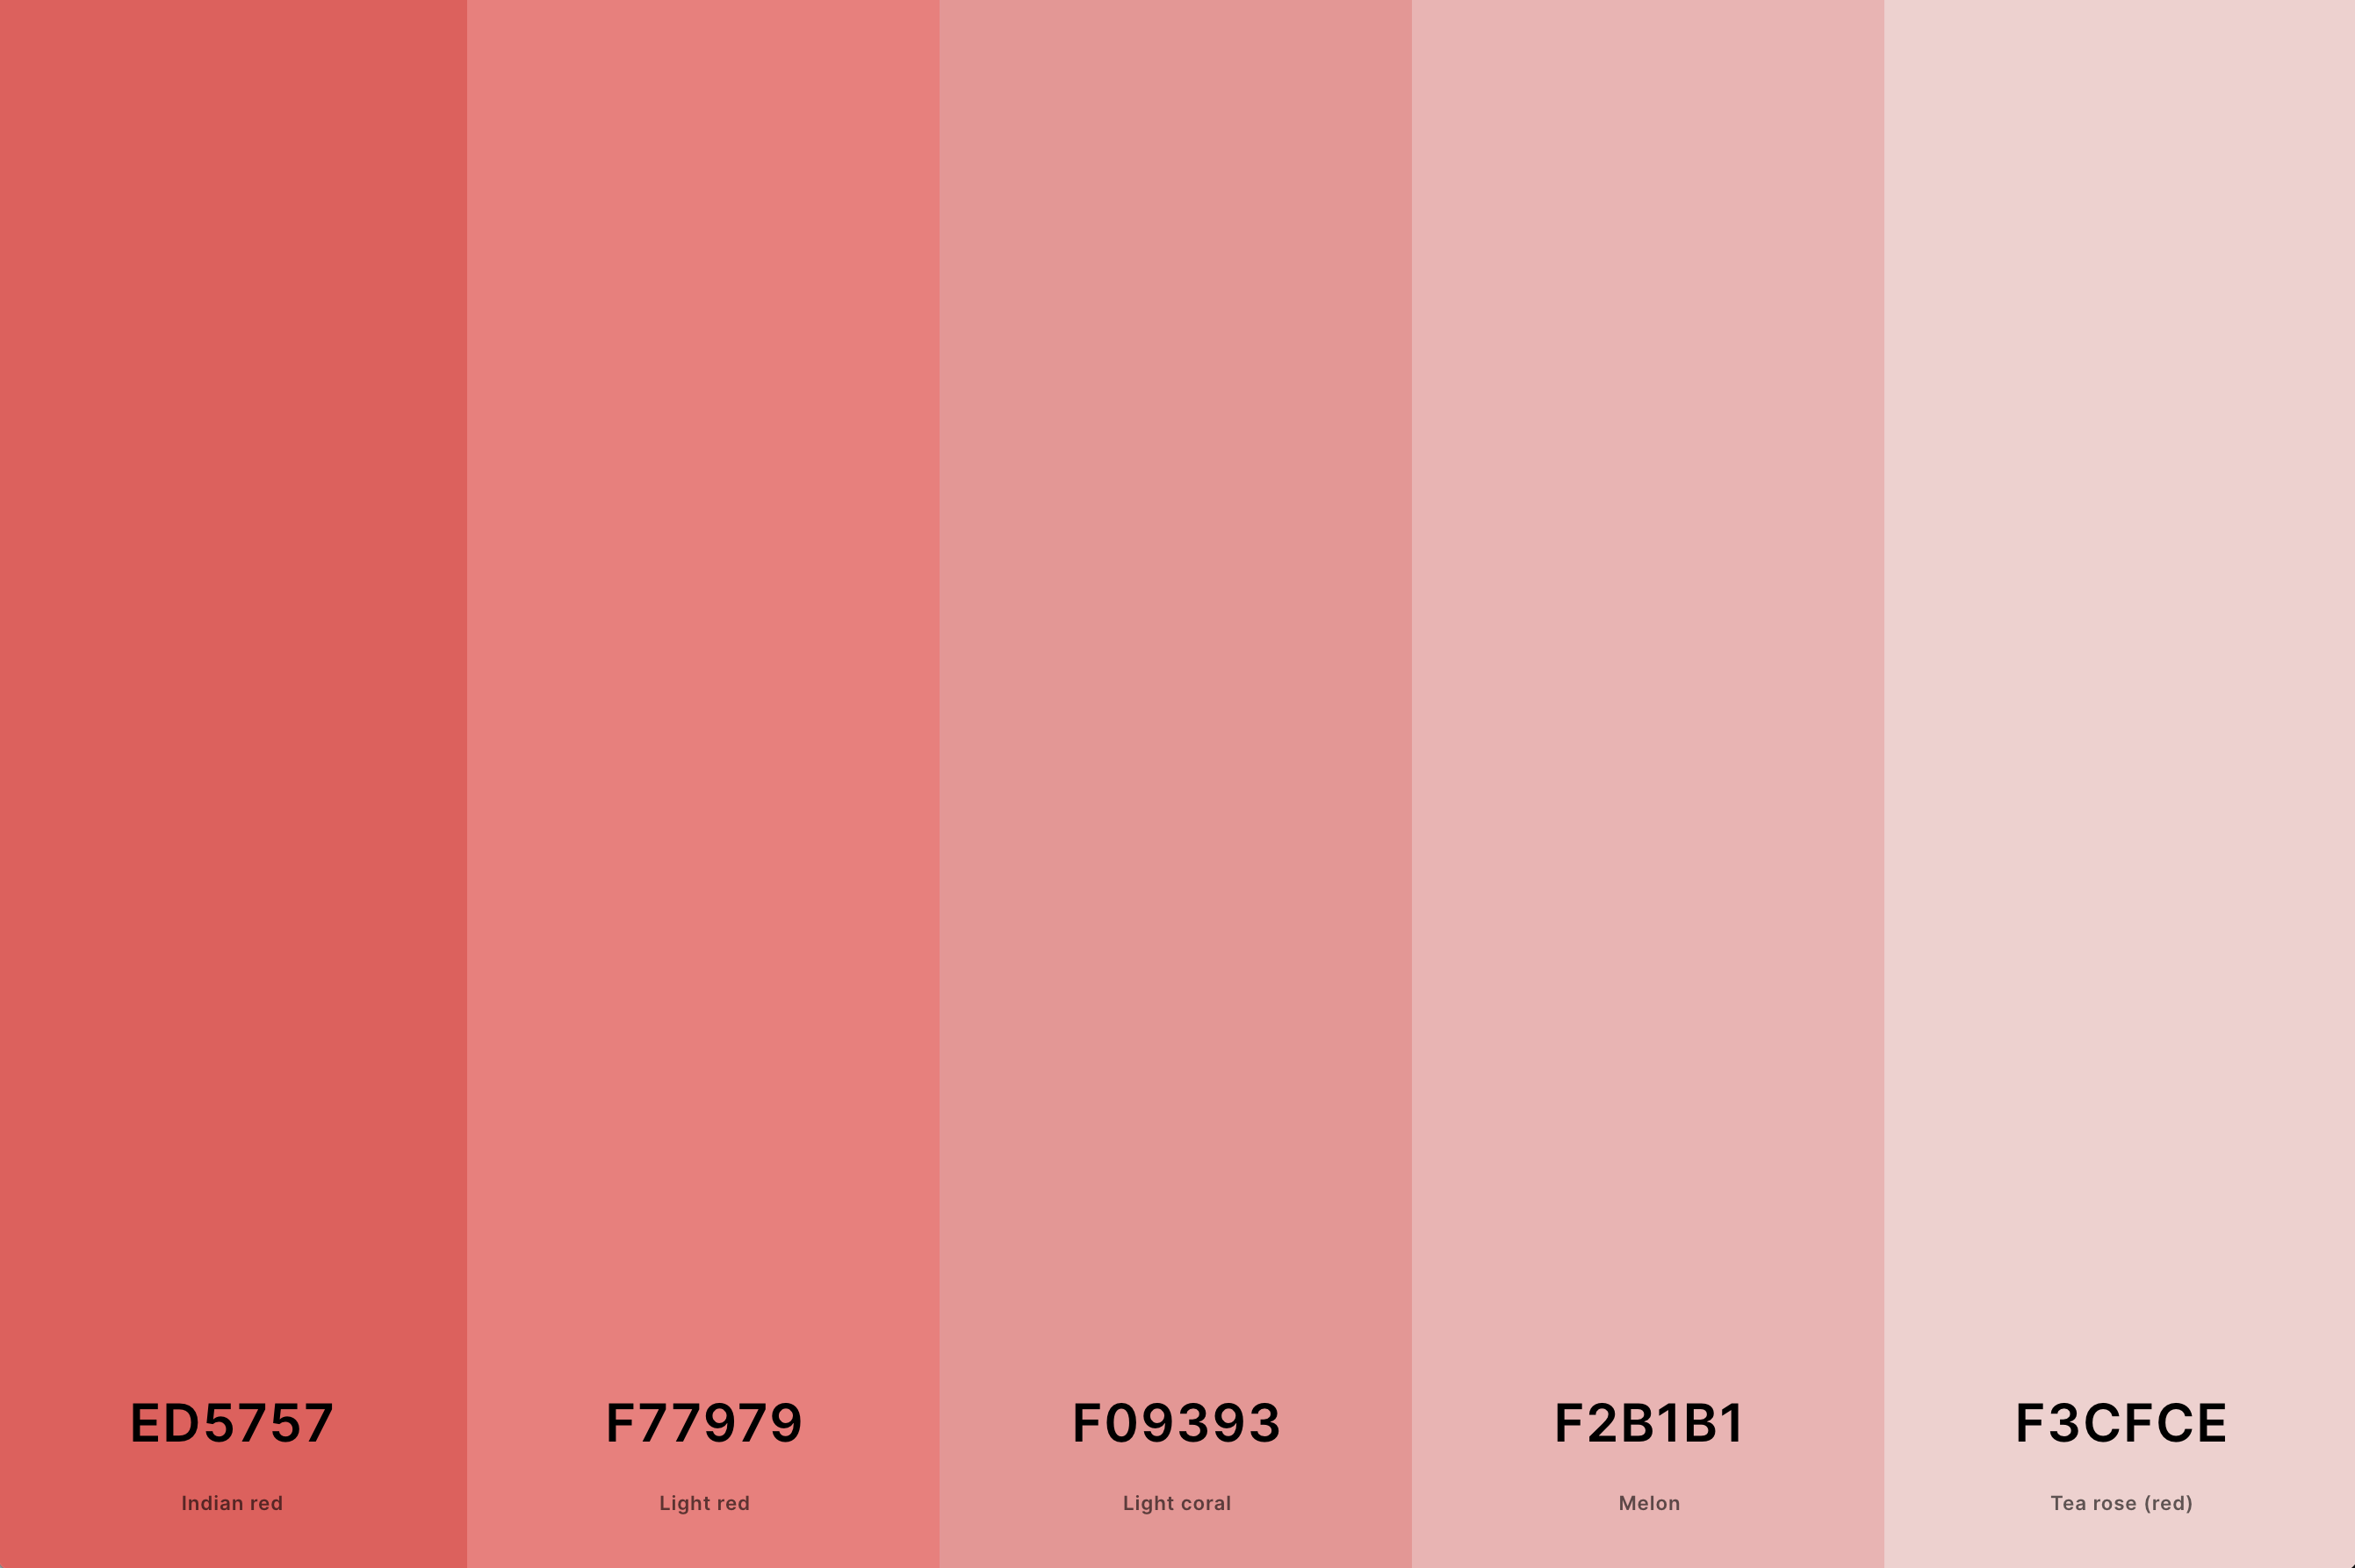 14. Pastel Red Color Palette Color Palette with Indian Red (Hex #ED5757) + Light Red (Hex #F77979) + Light Coral (Hex #F09393) + Melon (Hex #F2B1B1) + Tea Rose (Red) (Hex #F3CFCE) Color Palette with Hex Codes